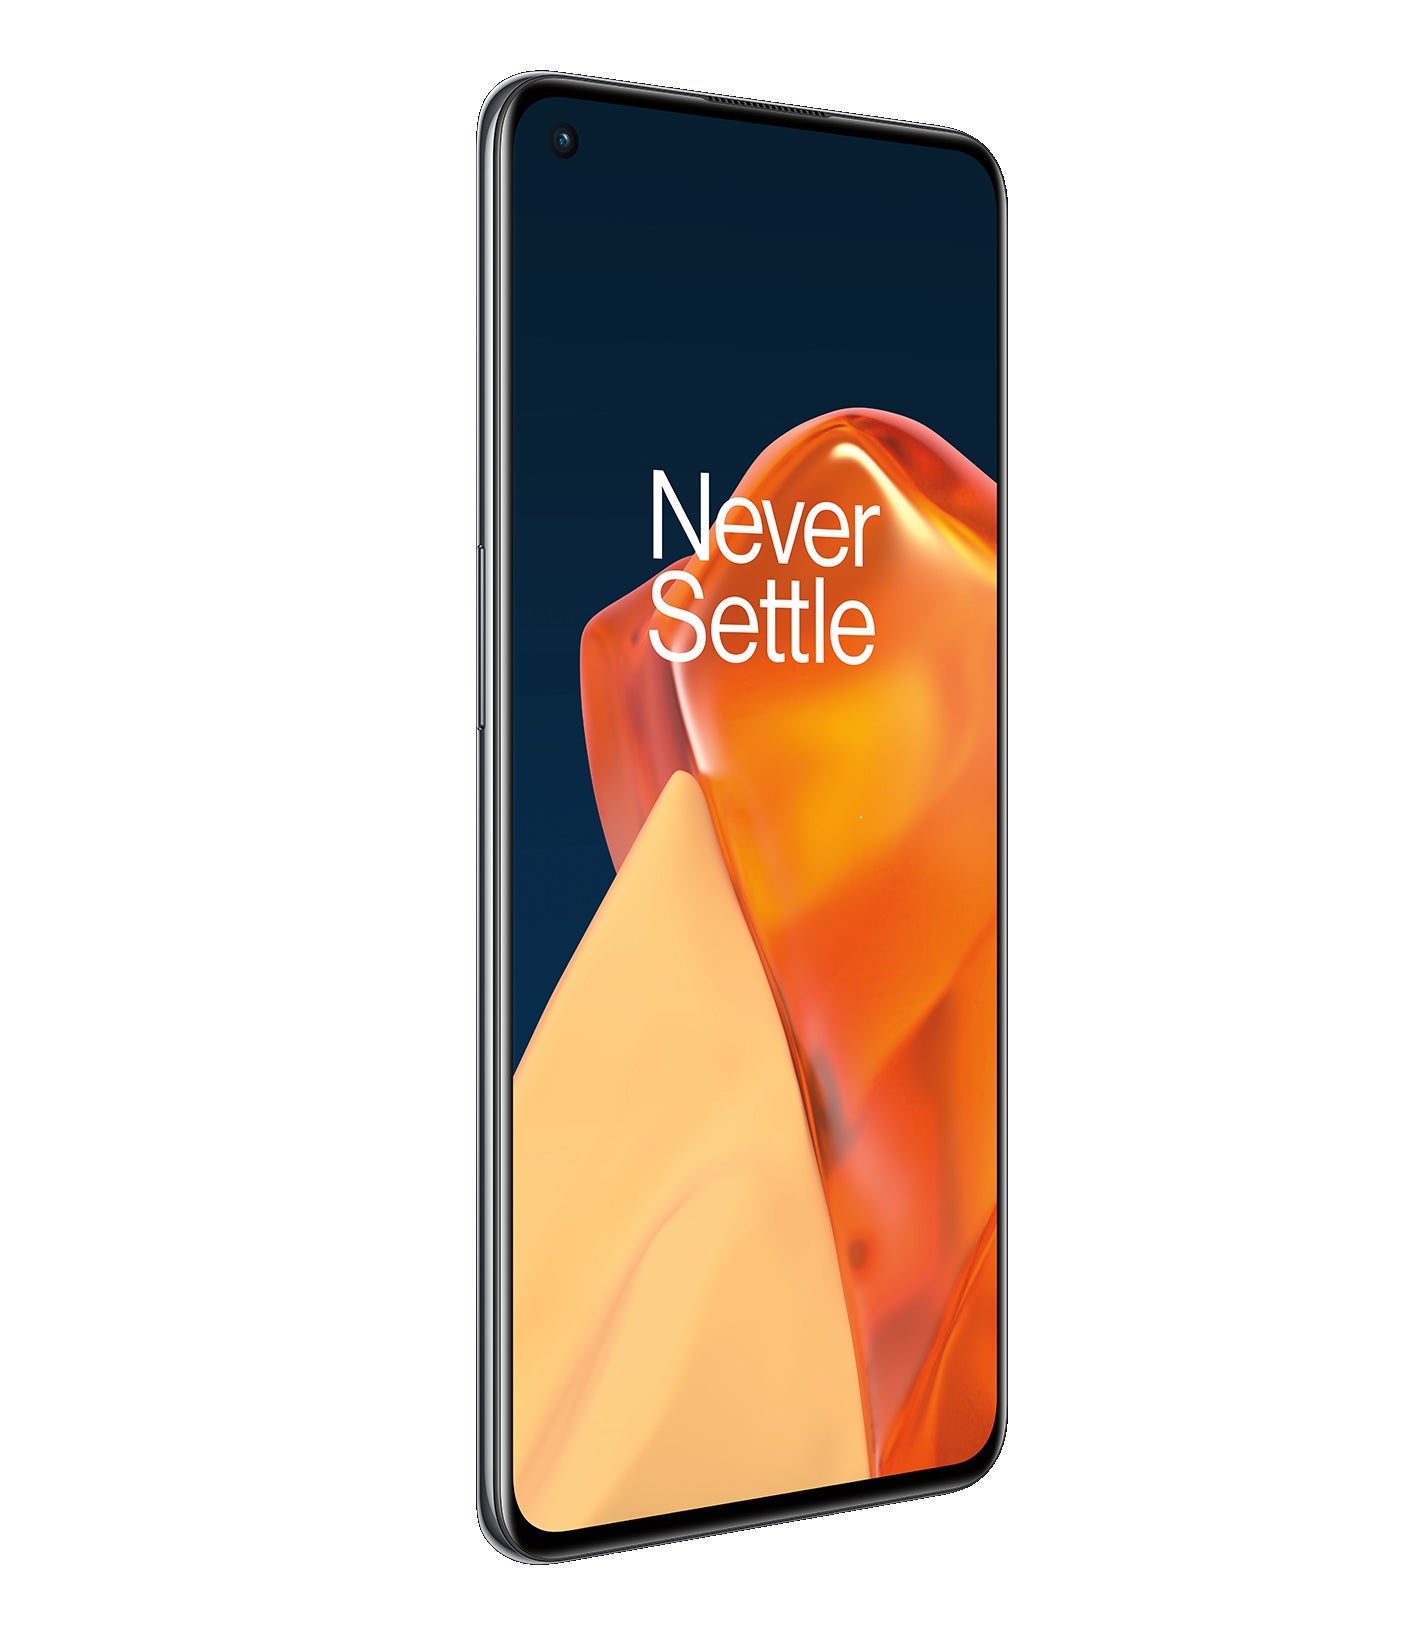 OnePlus 9 5G Mobile Phone